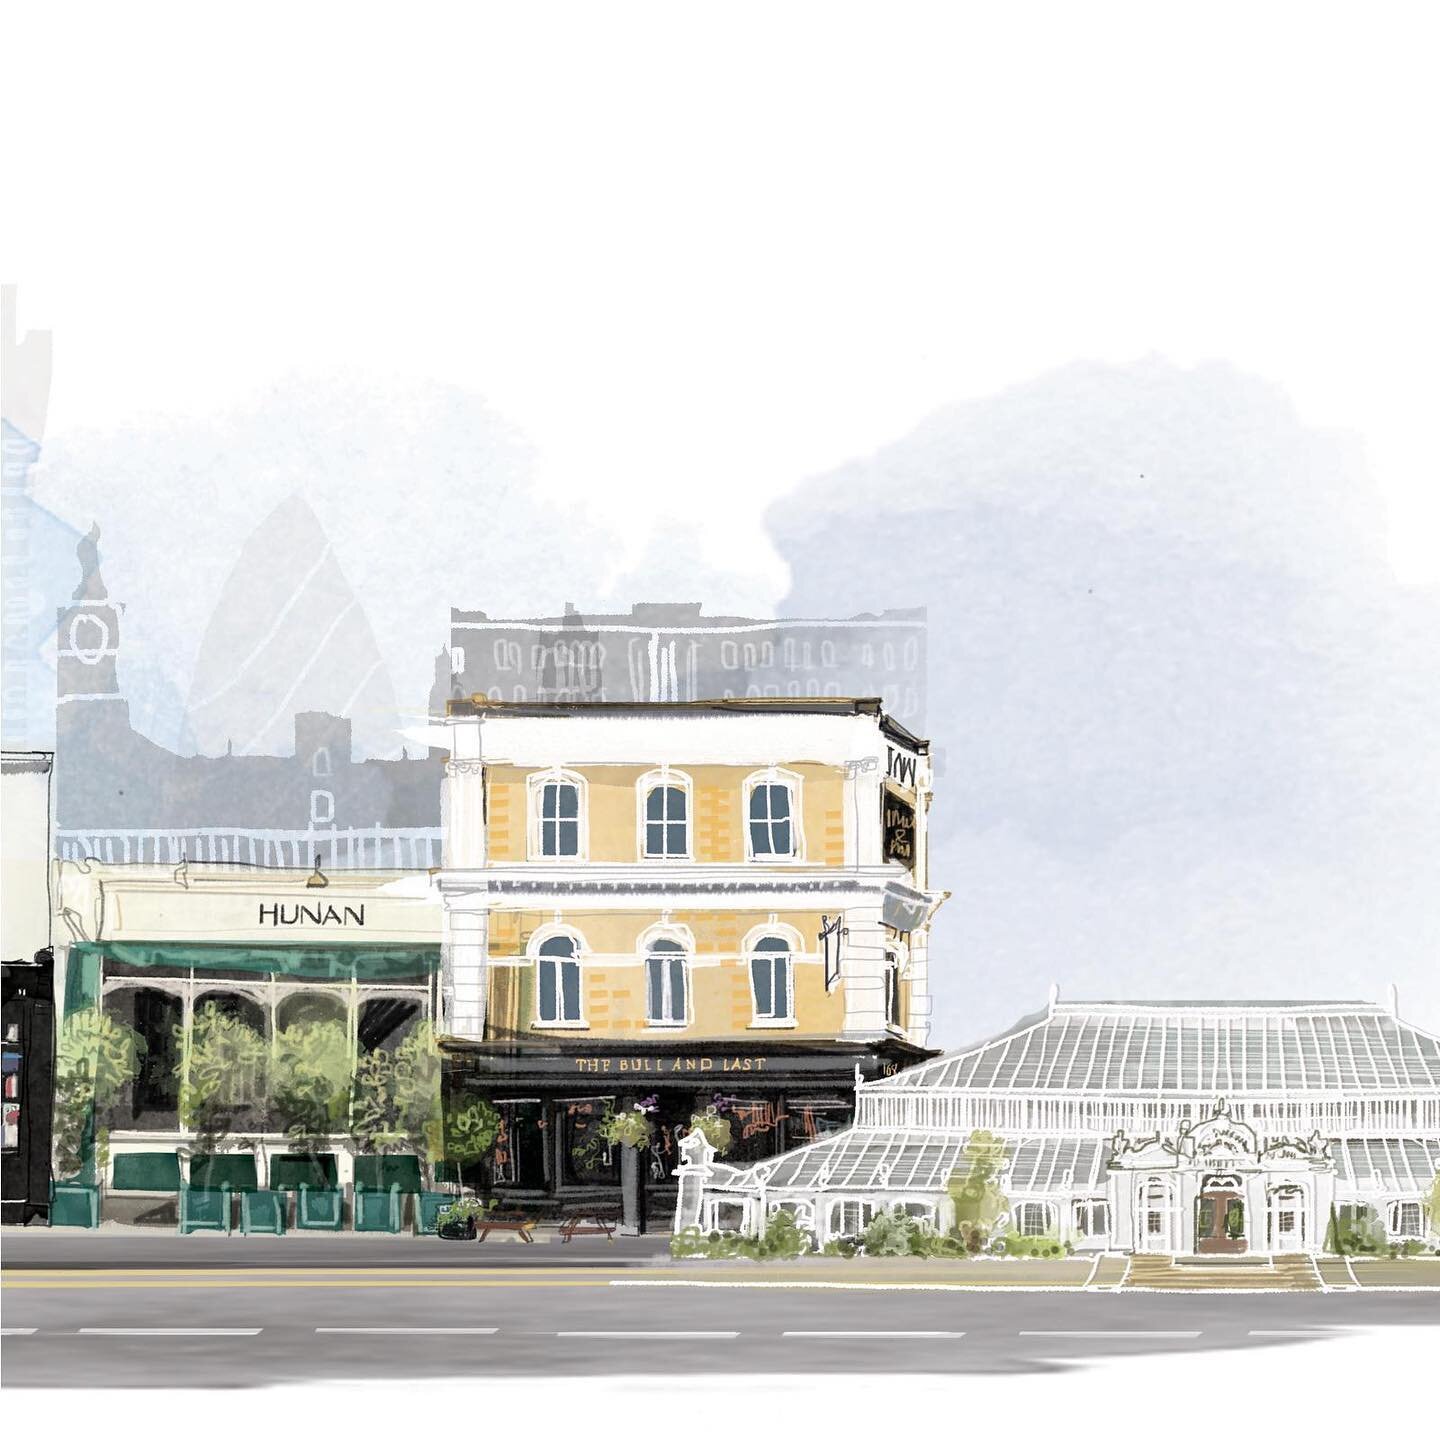 Falling in love with London all over again with this commission for @countrylifemagazine thank you as always @emilyrose_anderson 👌✨

Seeing the city through the eyes and words of @jo_rodgers I loved diving deep into the visual details of her long we